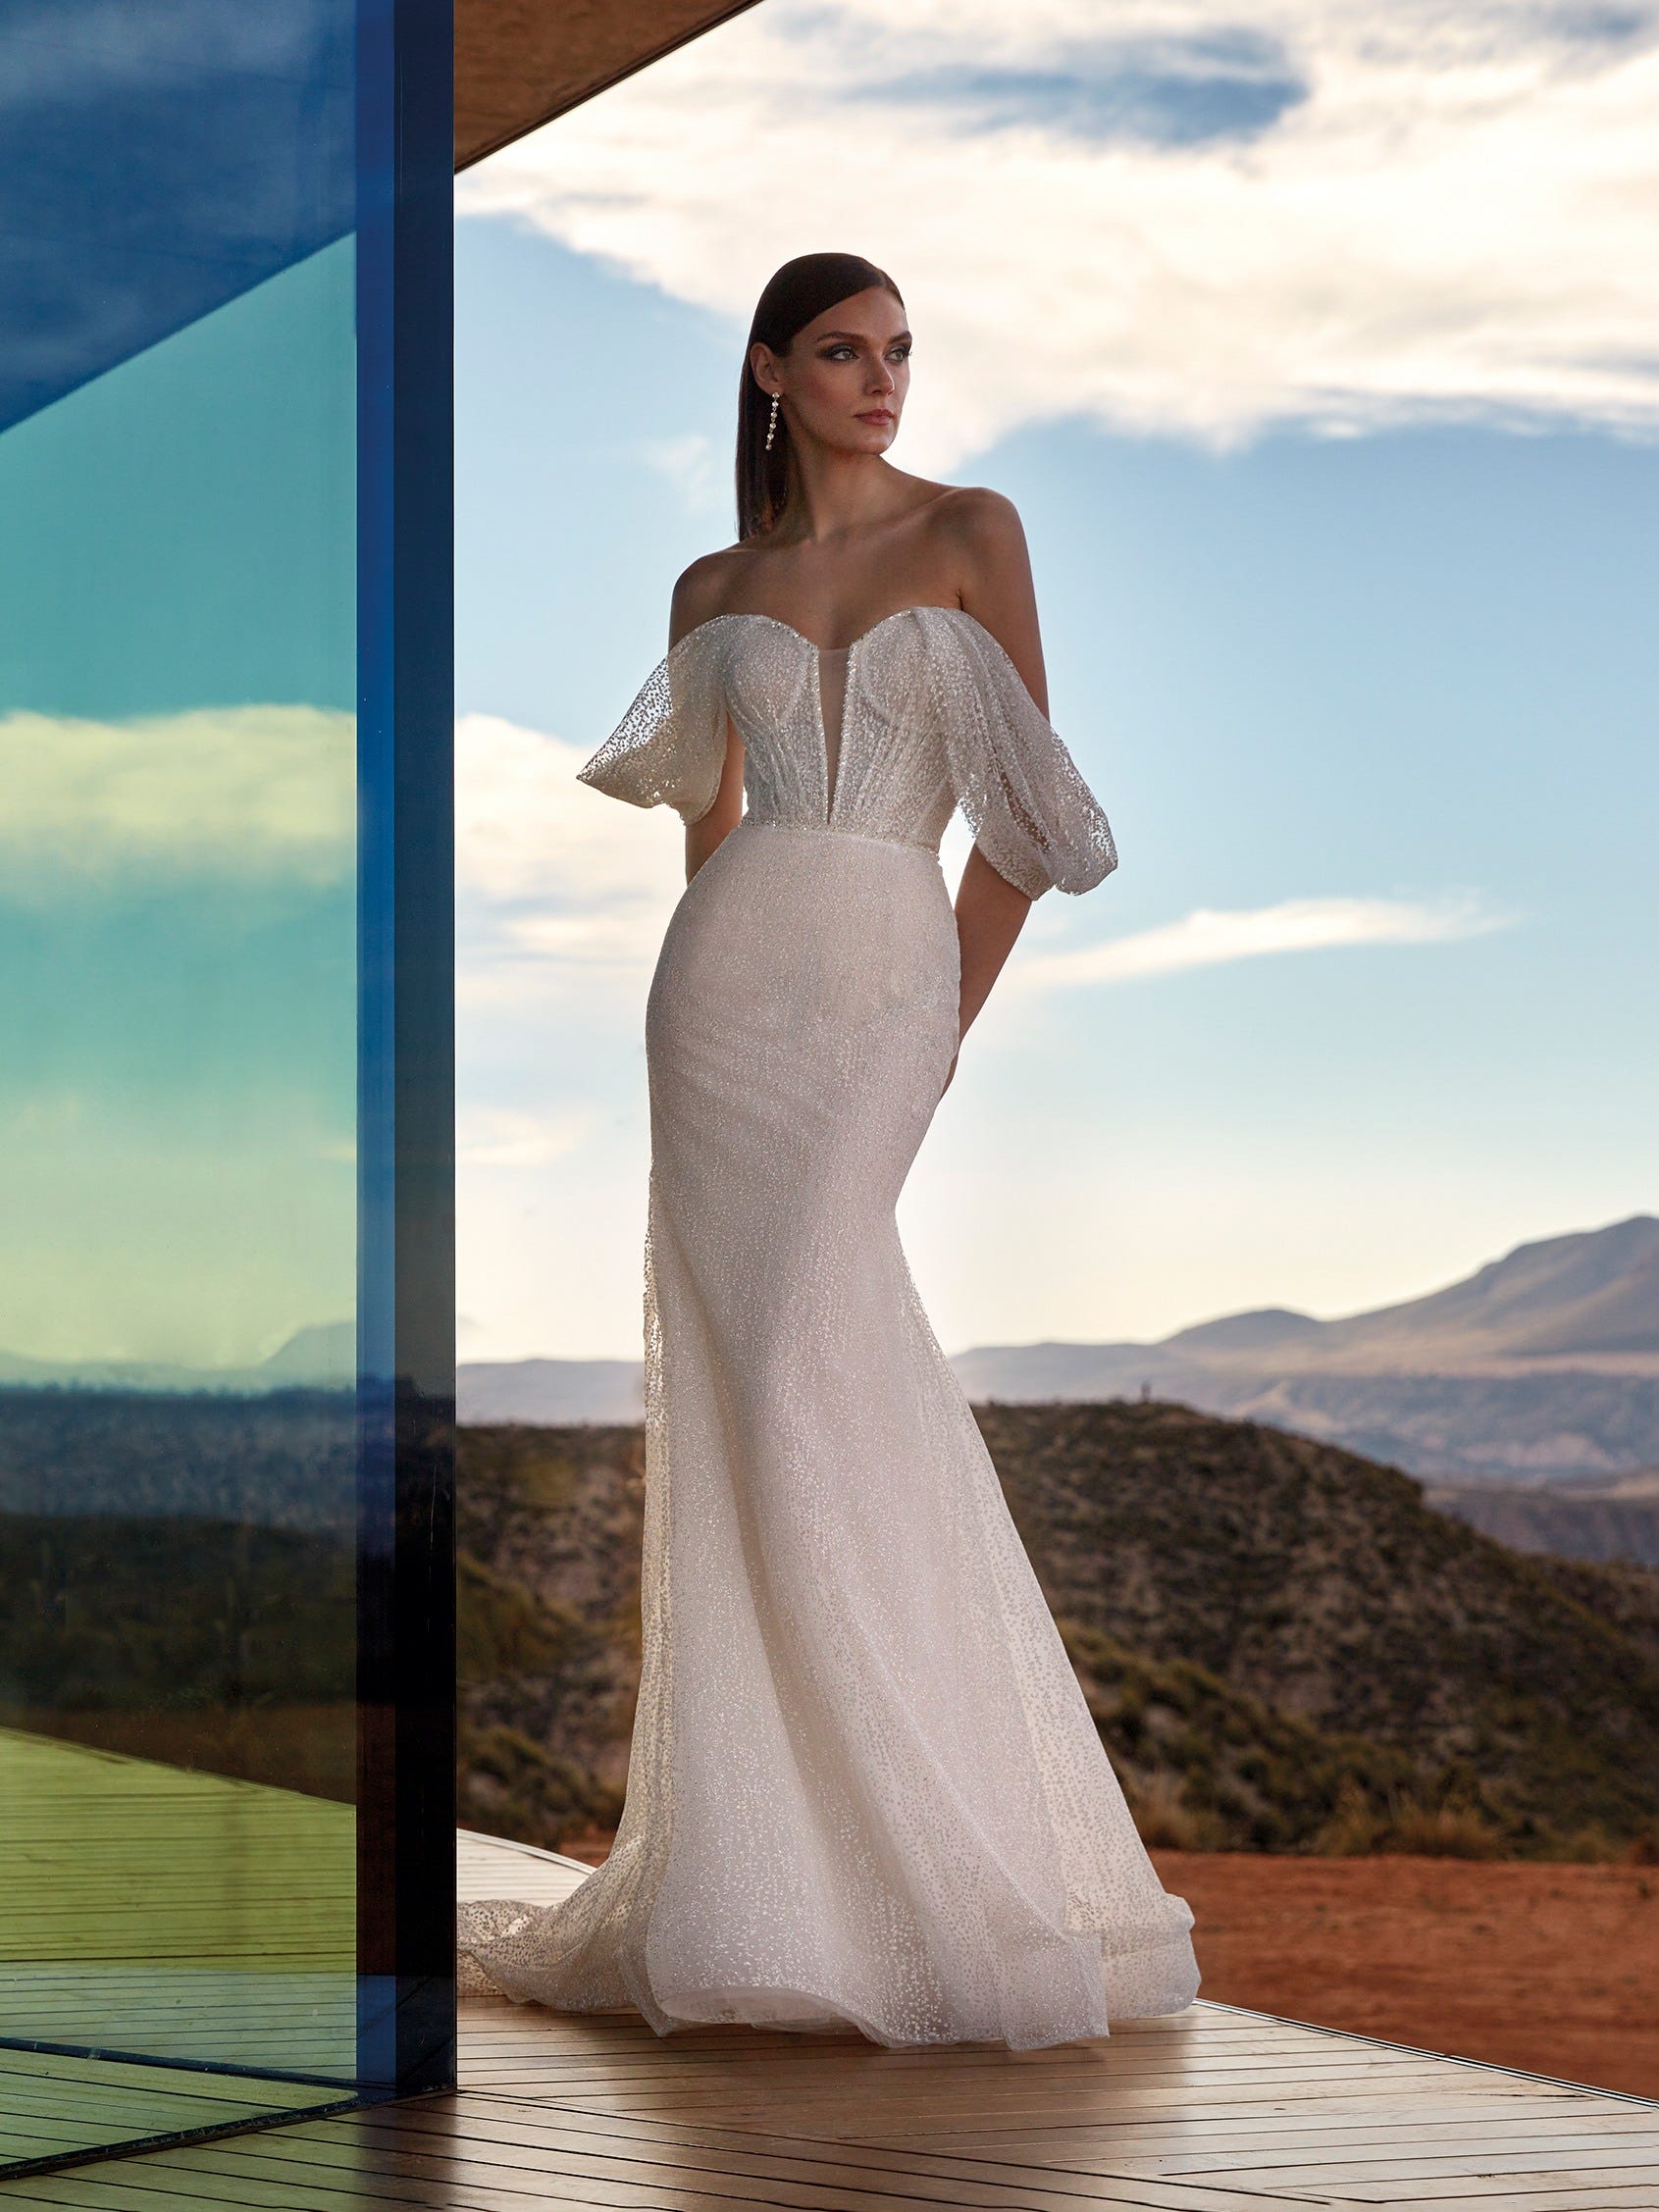 Spanish Wedding Dresses with Delicate Detailing